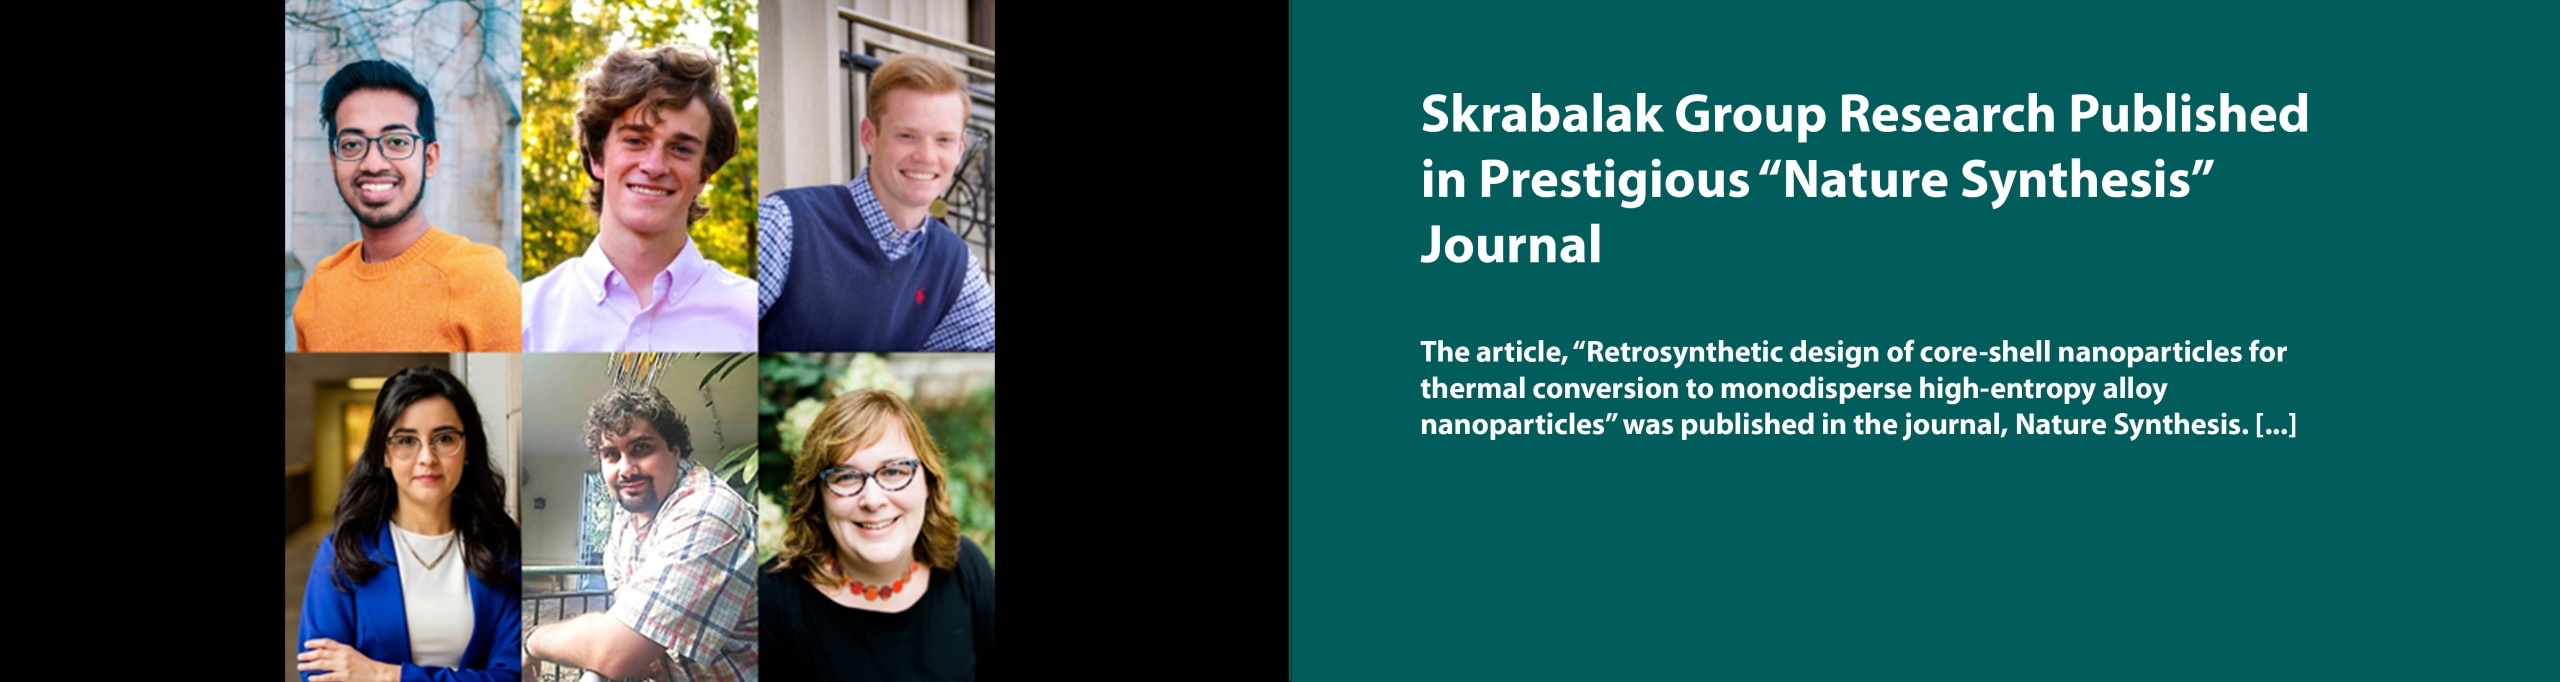 Skrabalak Group Research Published in Prestigious Journal